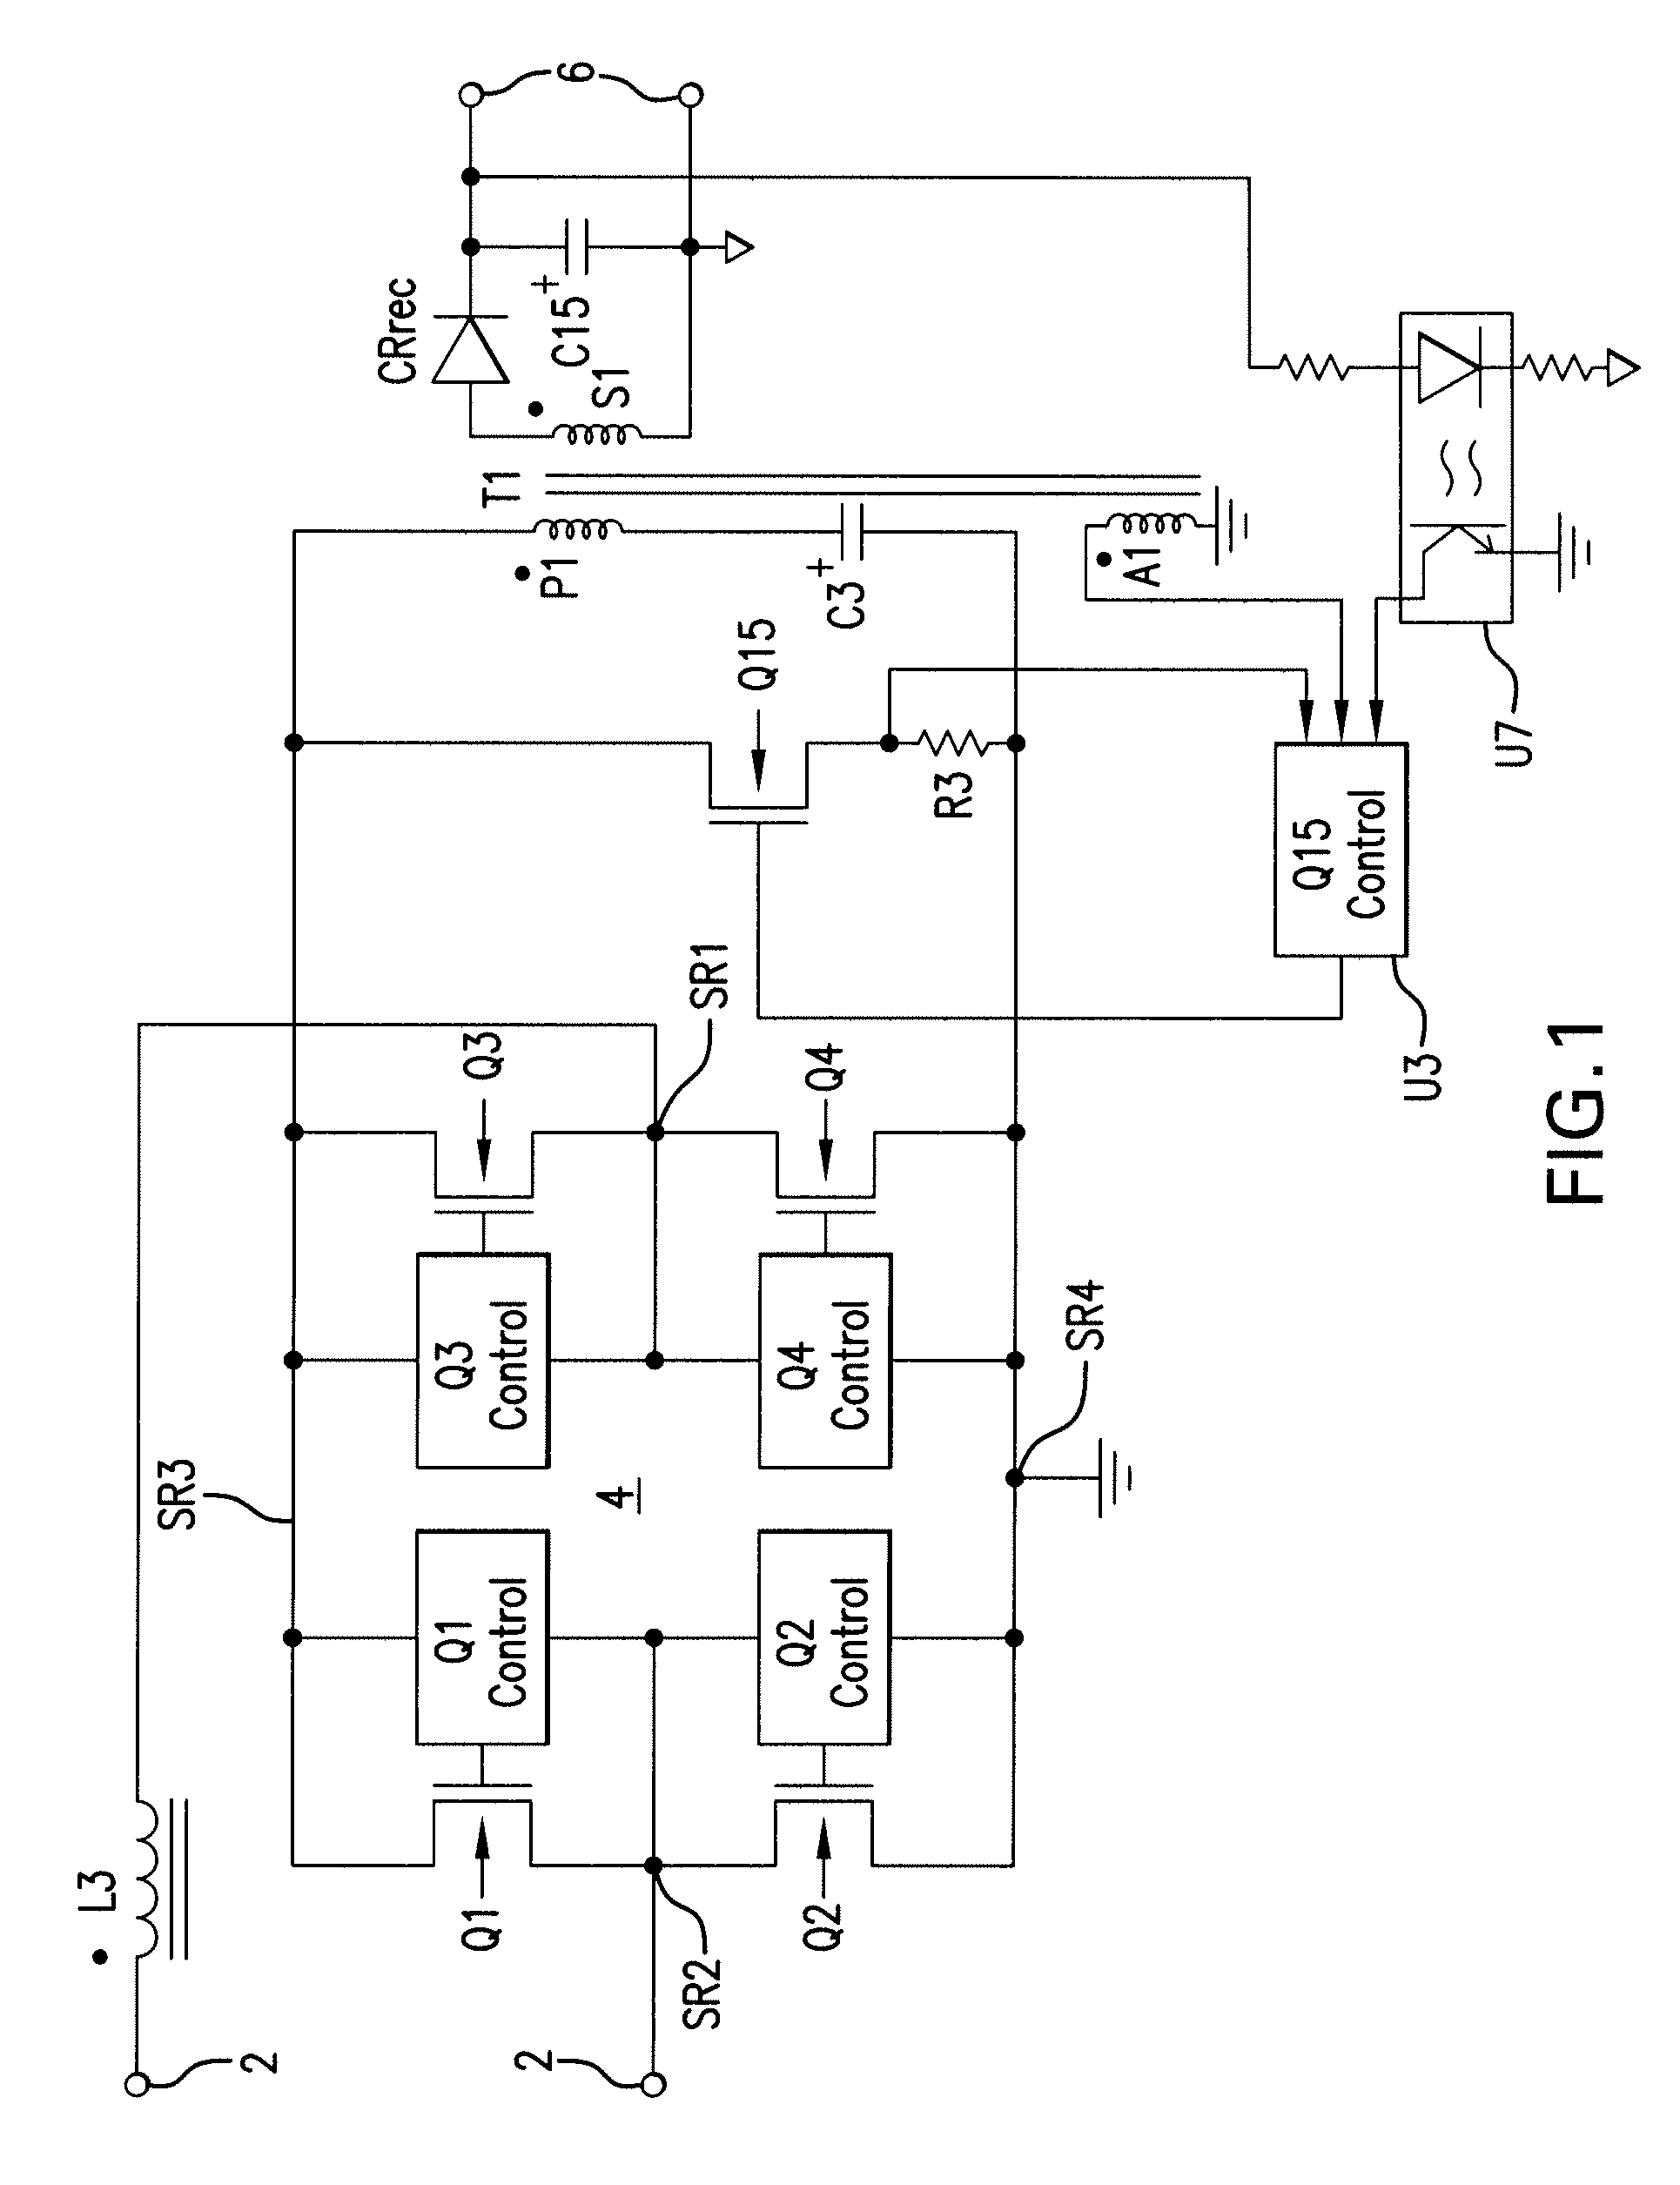 Synchronous ac rectified flyback converter utilizing boost inductor